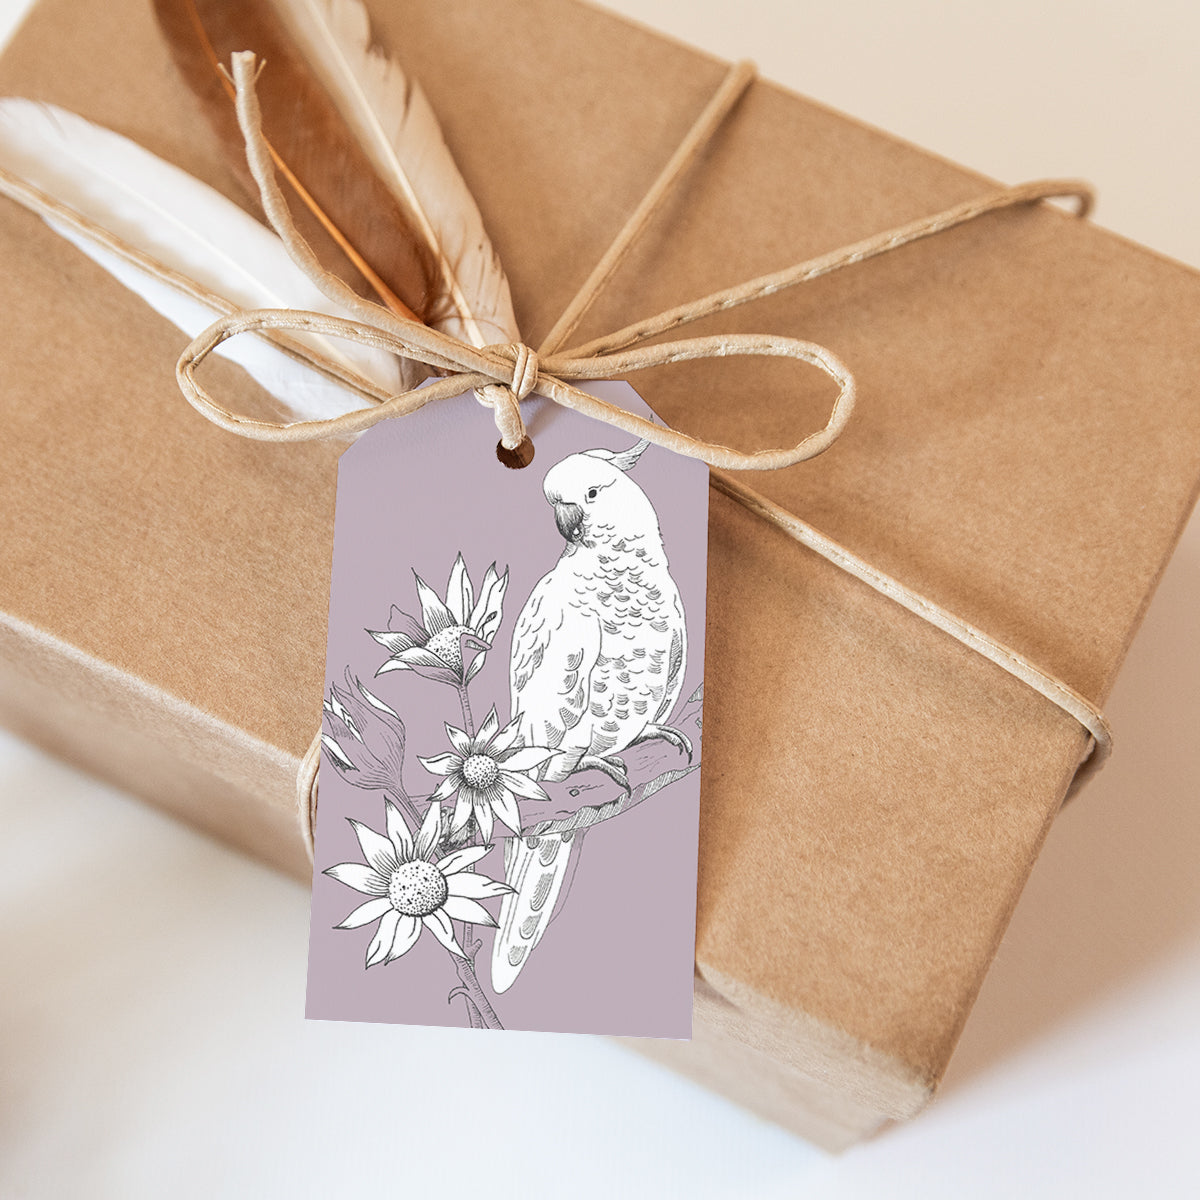 Cockatoo/Flannel Flower Gift Tags - set of 6